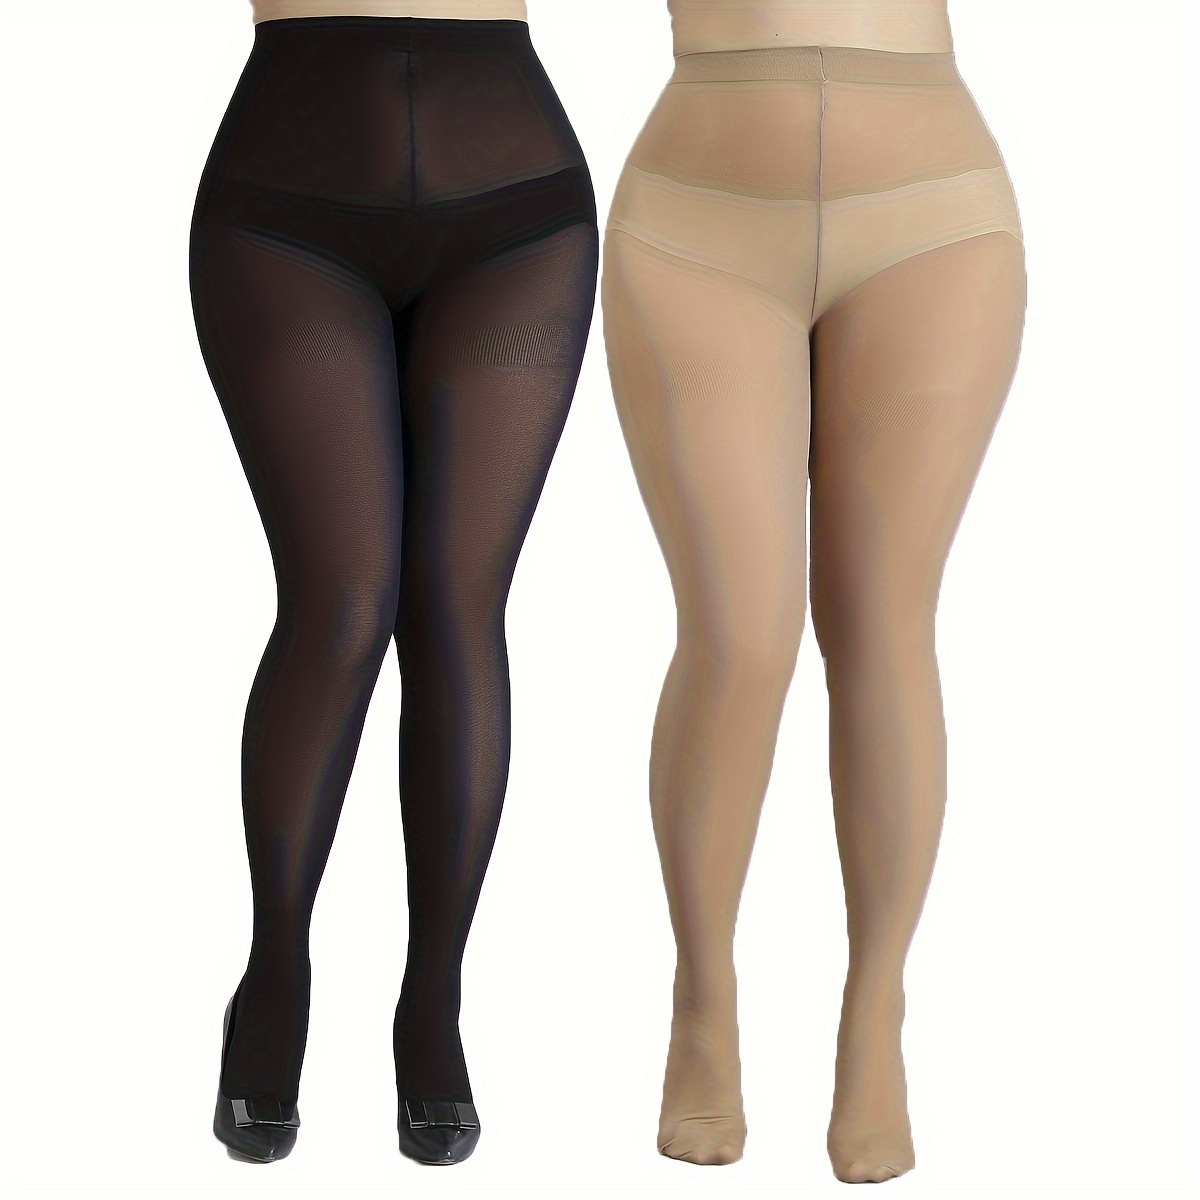 1 Pair Plus Size Casual Pantyhose For XL-2XL, Women's Plus 80D Semi Opaque  Control Top Reinforced Toe Tights